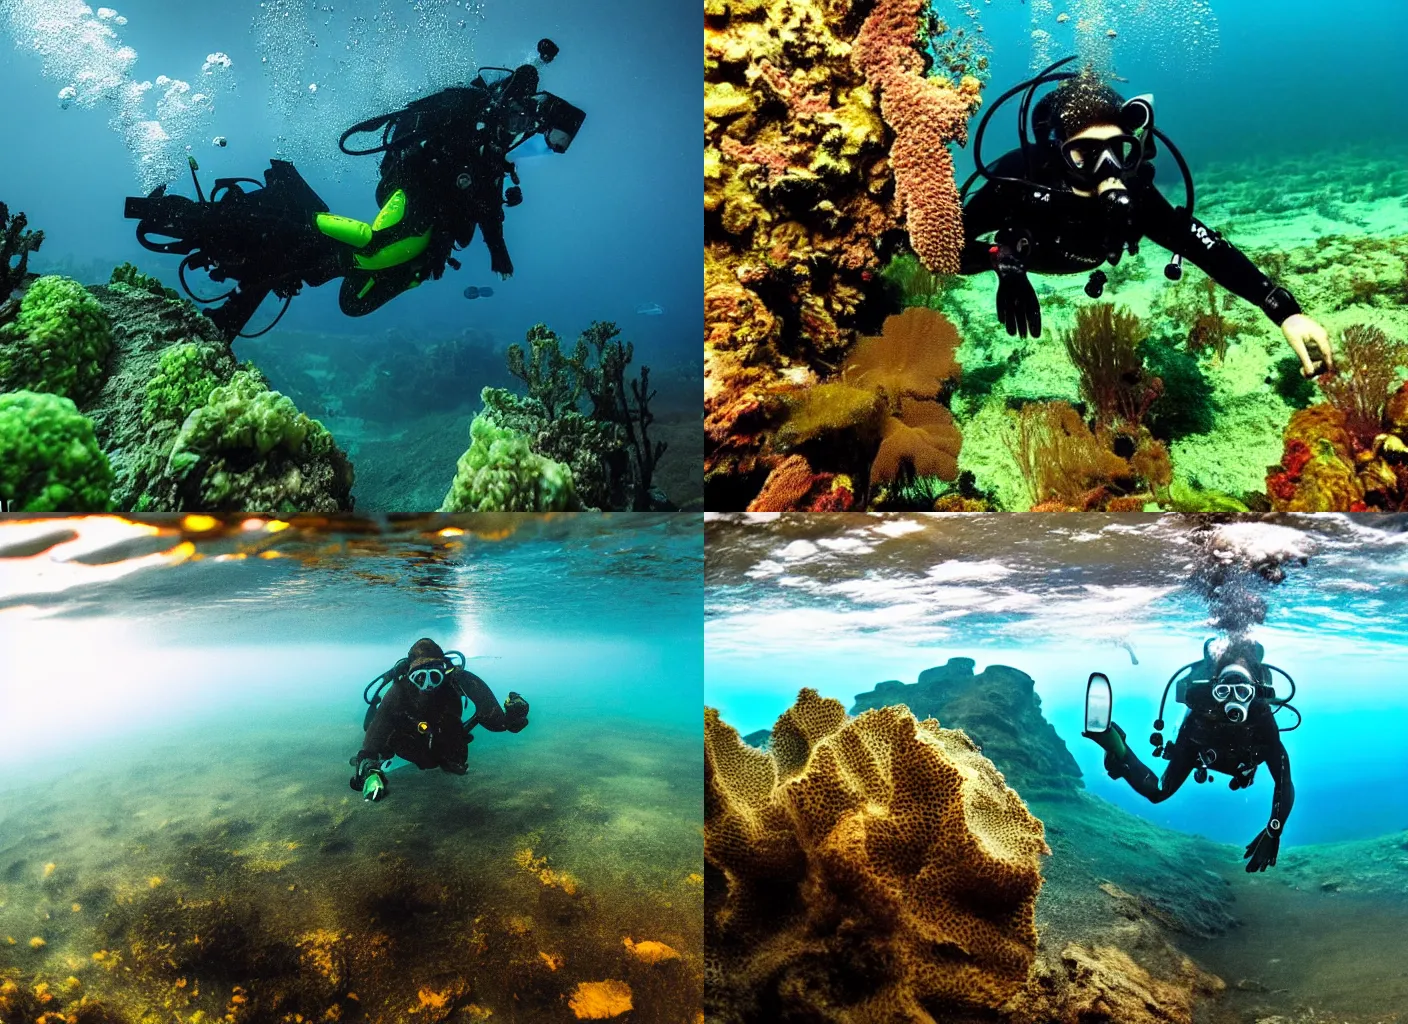 Prompt: an underwater photography of a scuba diver in the loch ness lake, bubbles, algae, rocks, maybe a monster